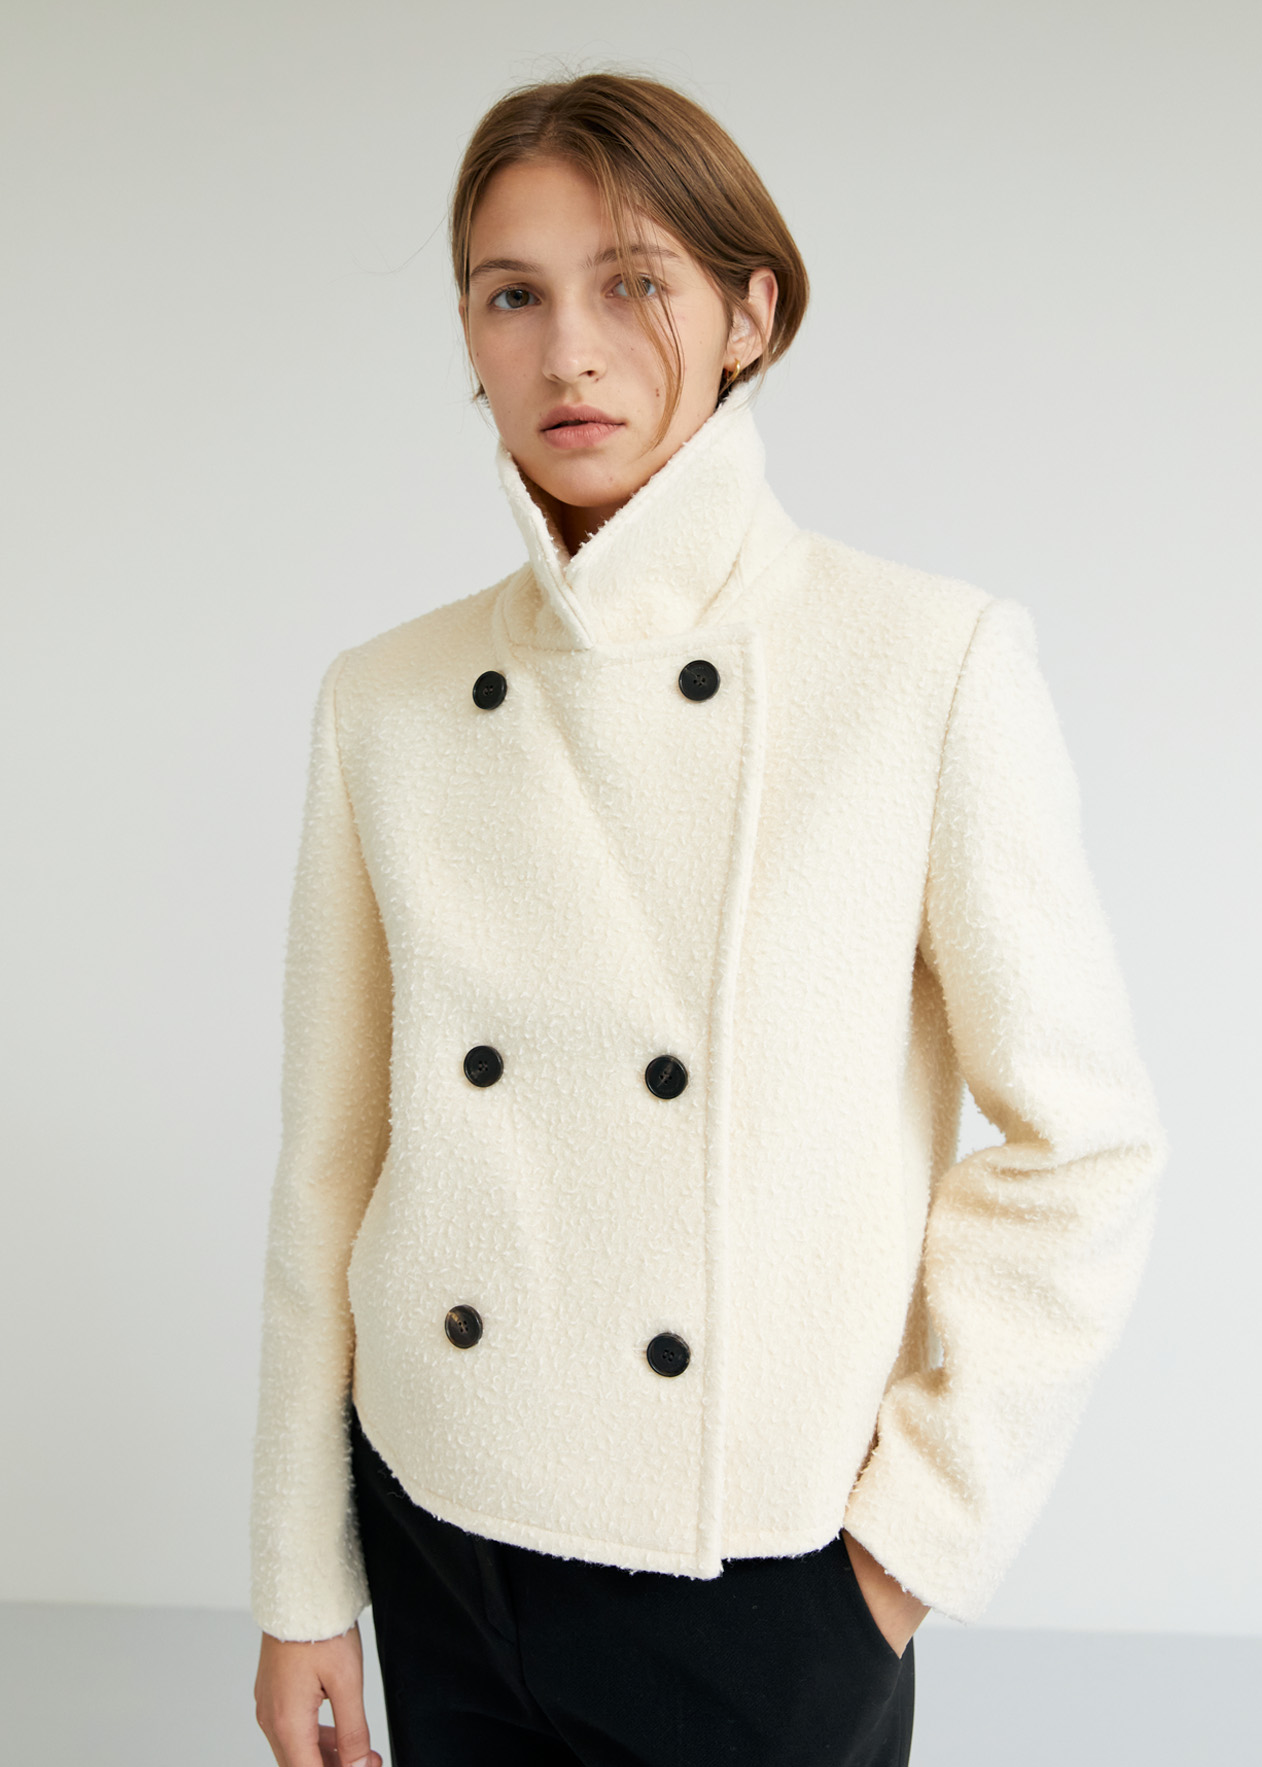 Casentino double crop jacket